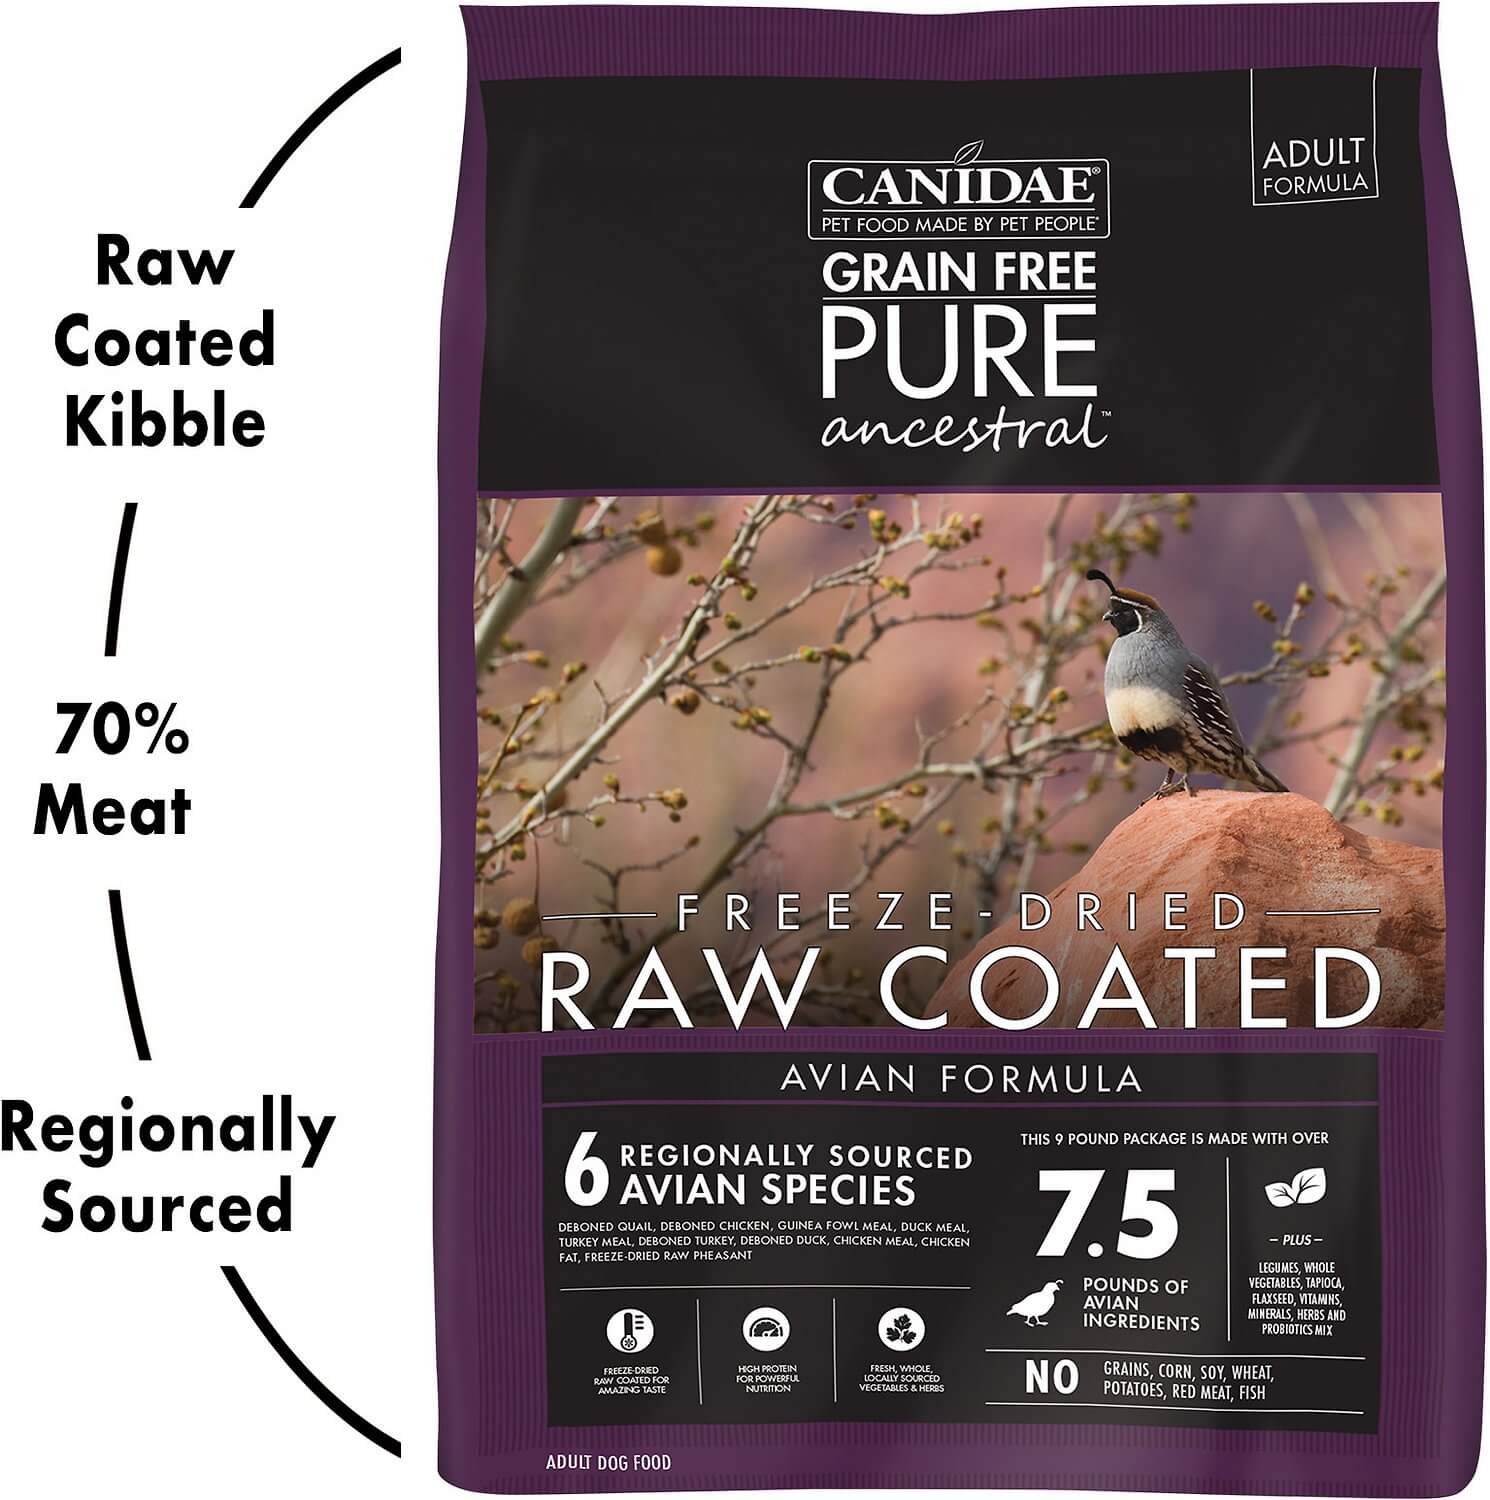 Canidae Grain-Free Pure Ancestral Dog Food Review (Dry)